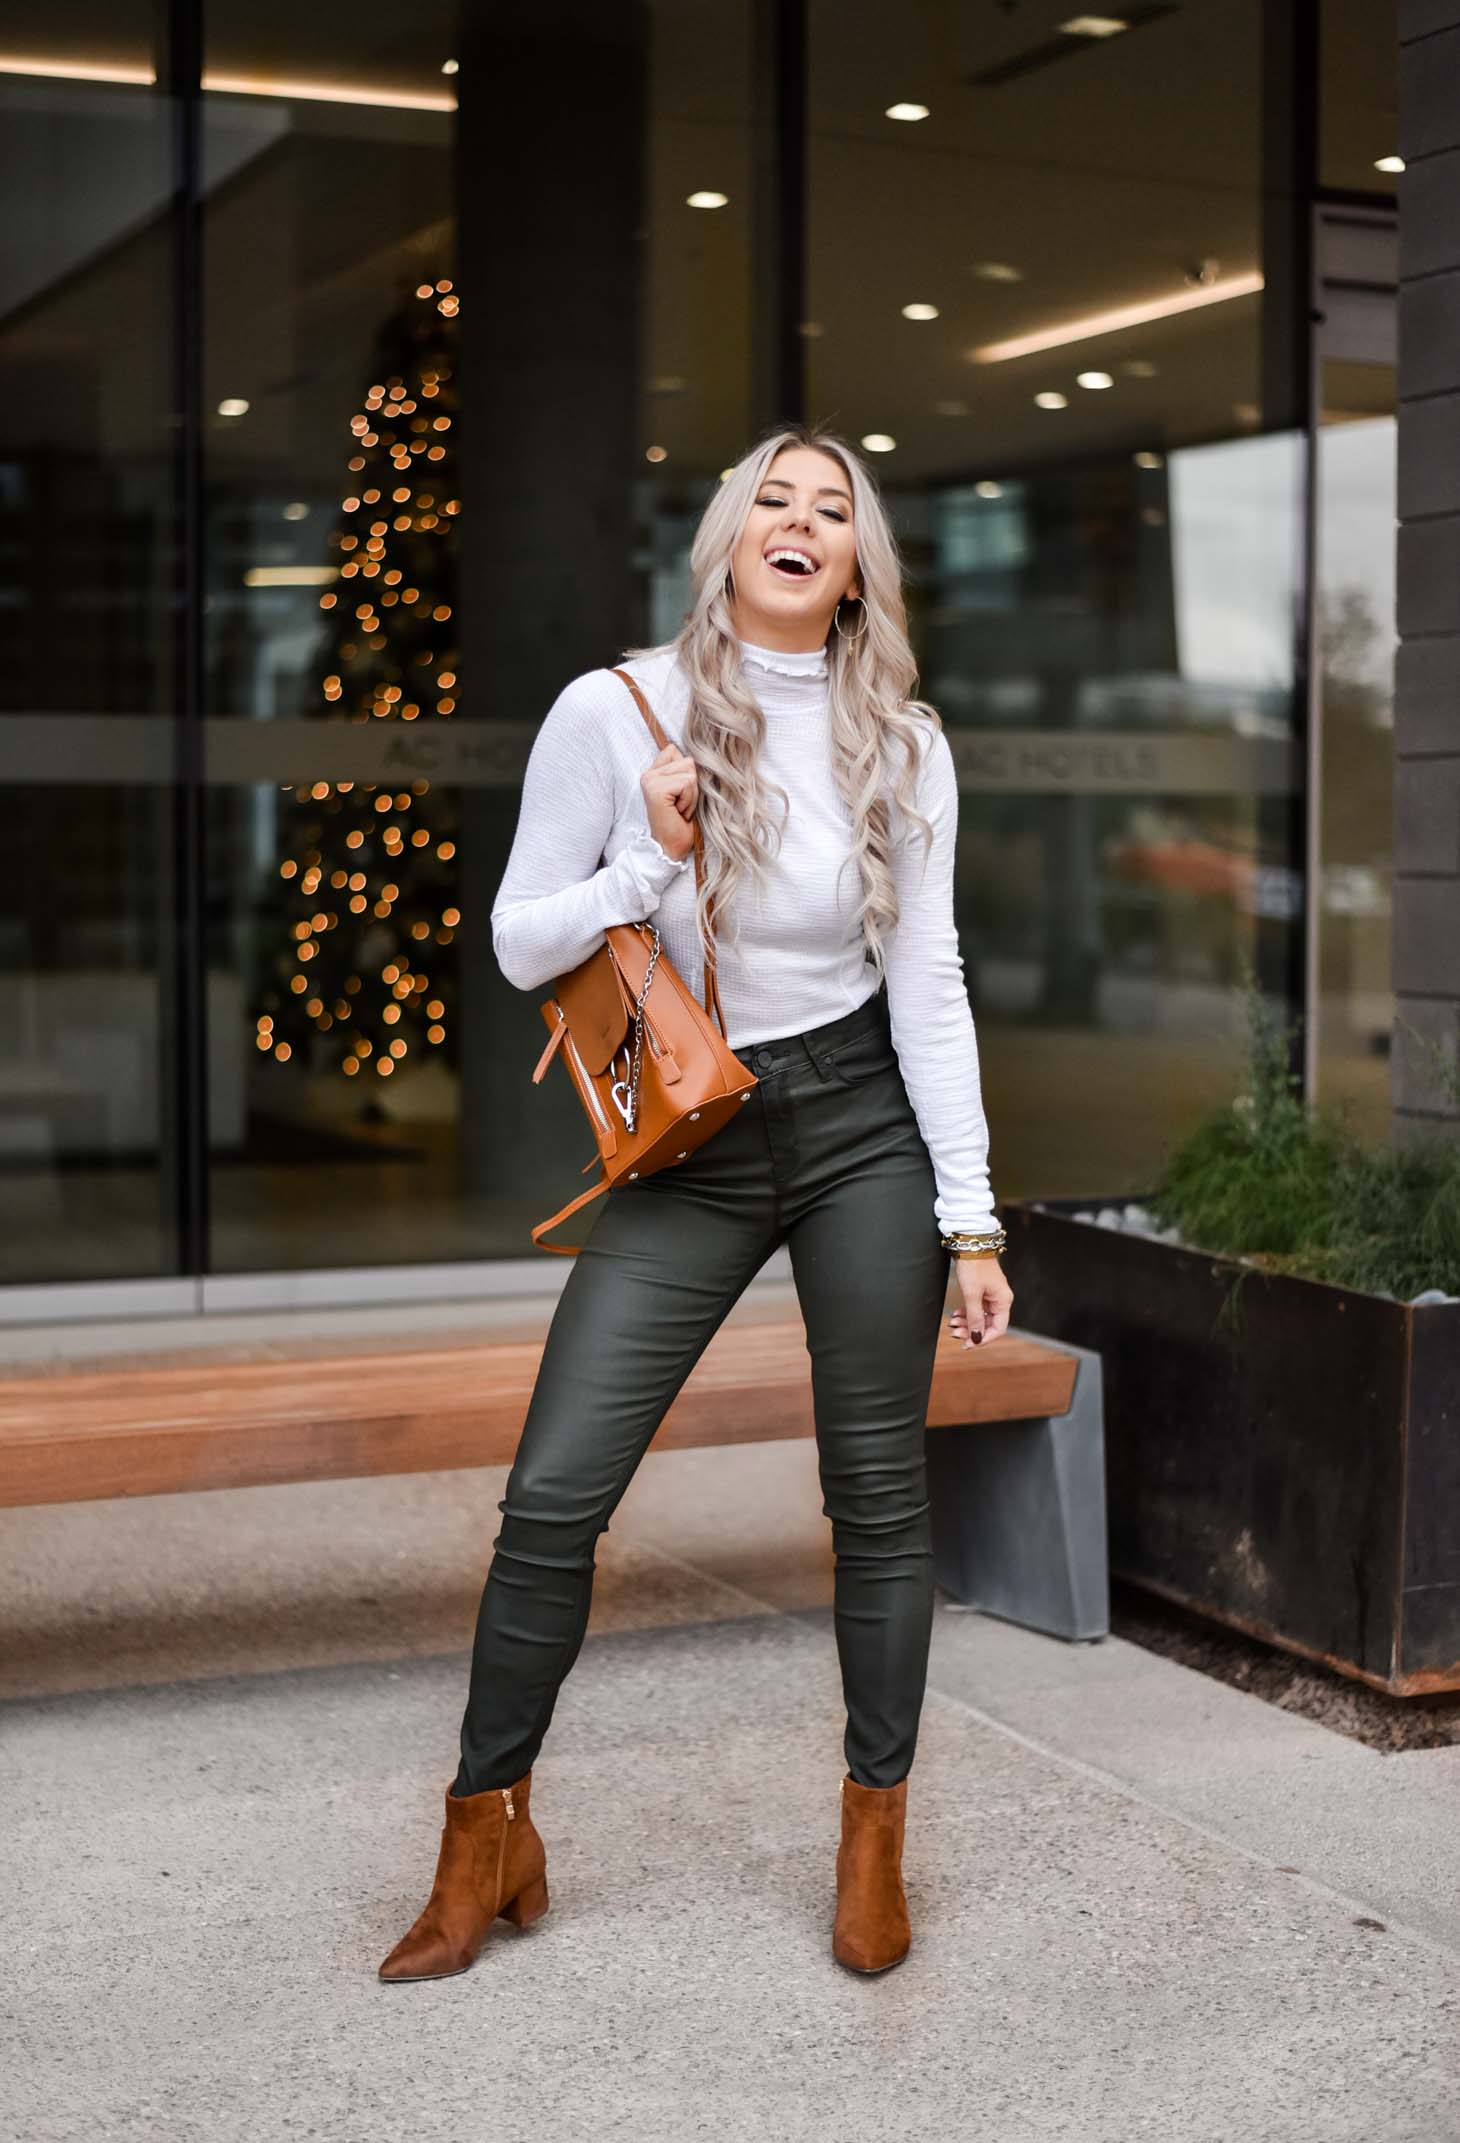 Erin Elizabeth of Wink and a Twirl shares the perfect leather pants and turtleneck look from Lulus during her stay at the AC Hotel Phoenix Biltmore in Phoenix, Arizona